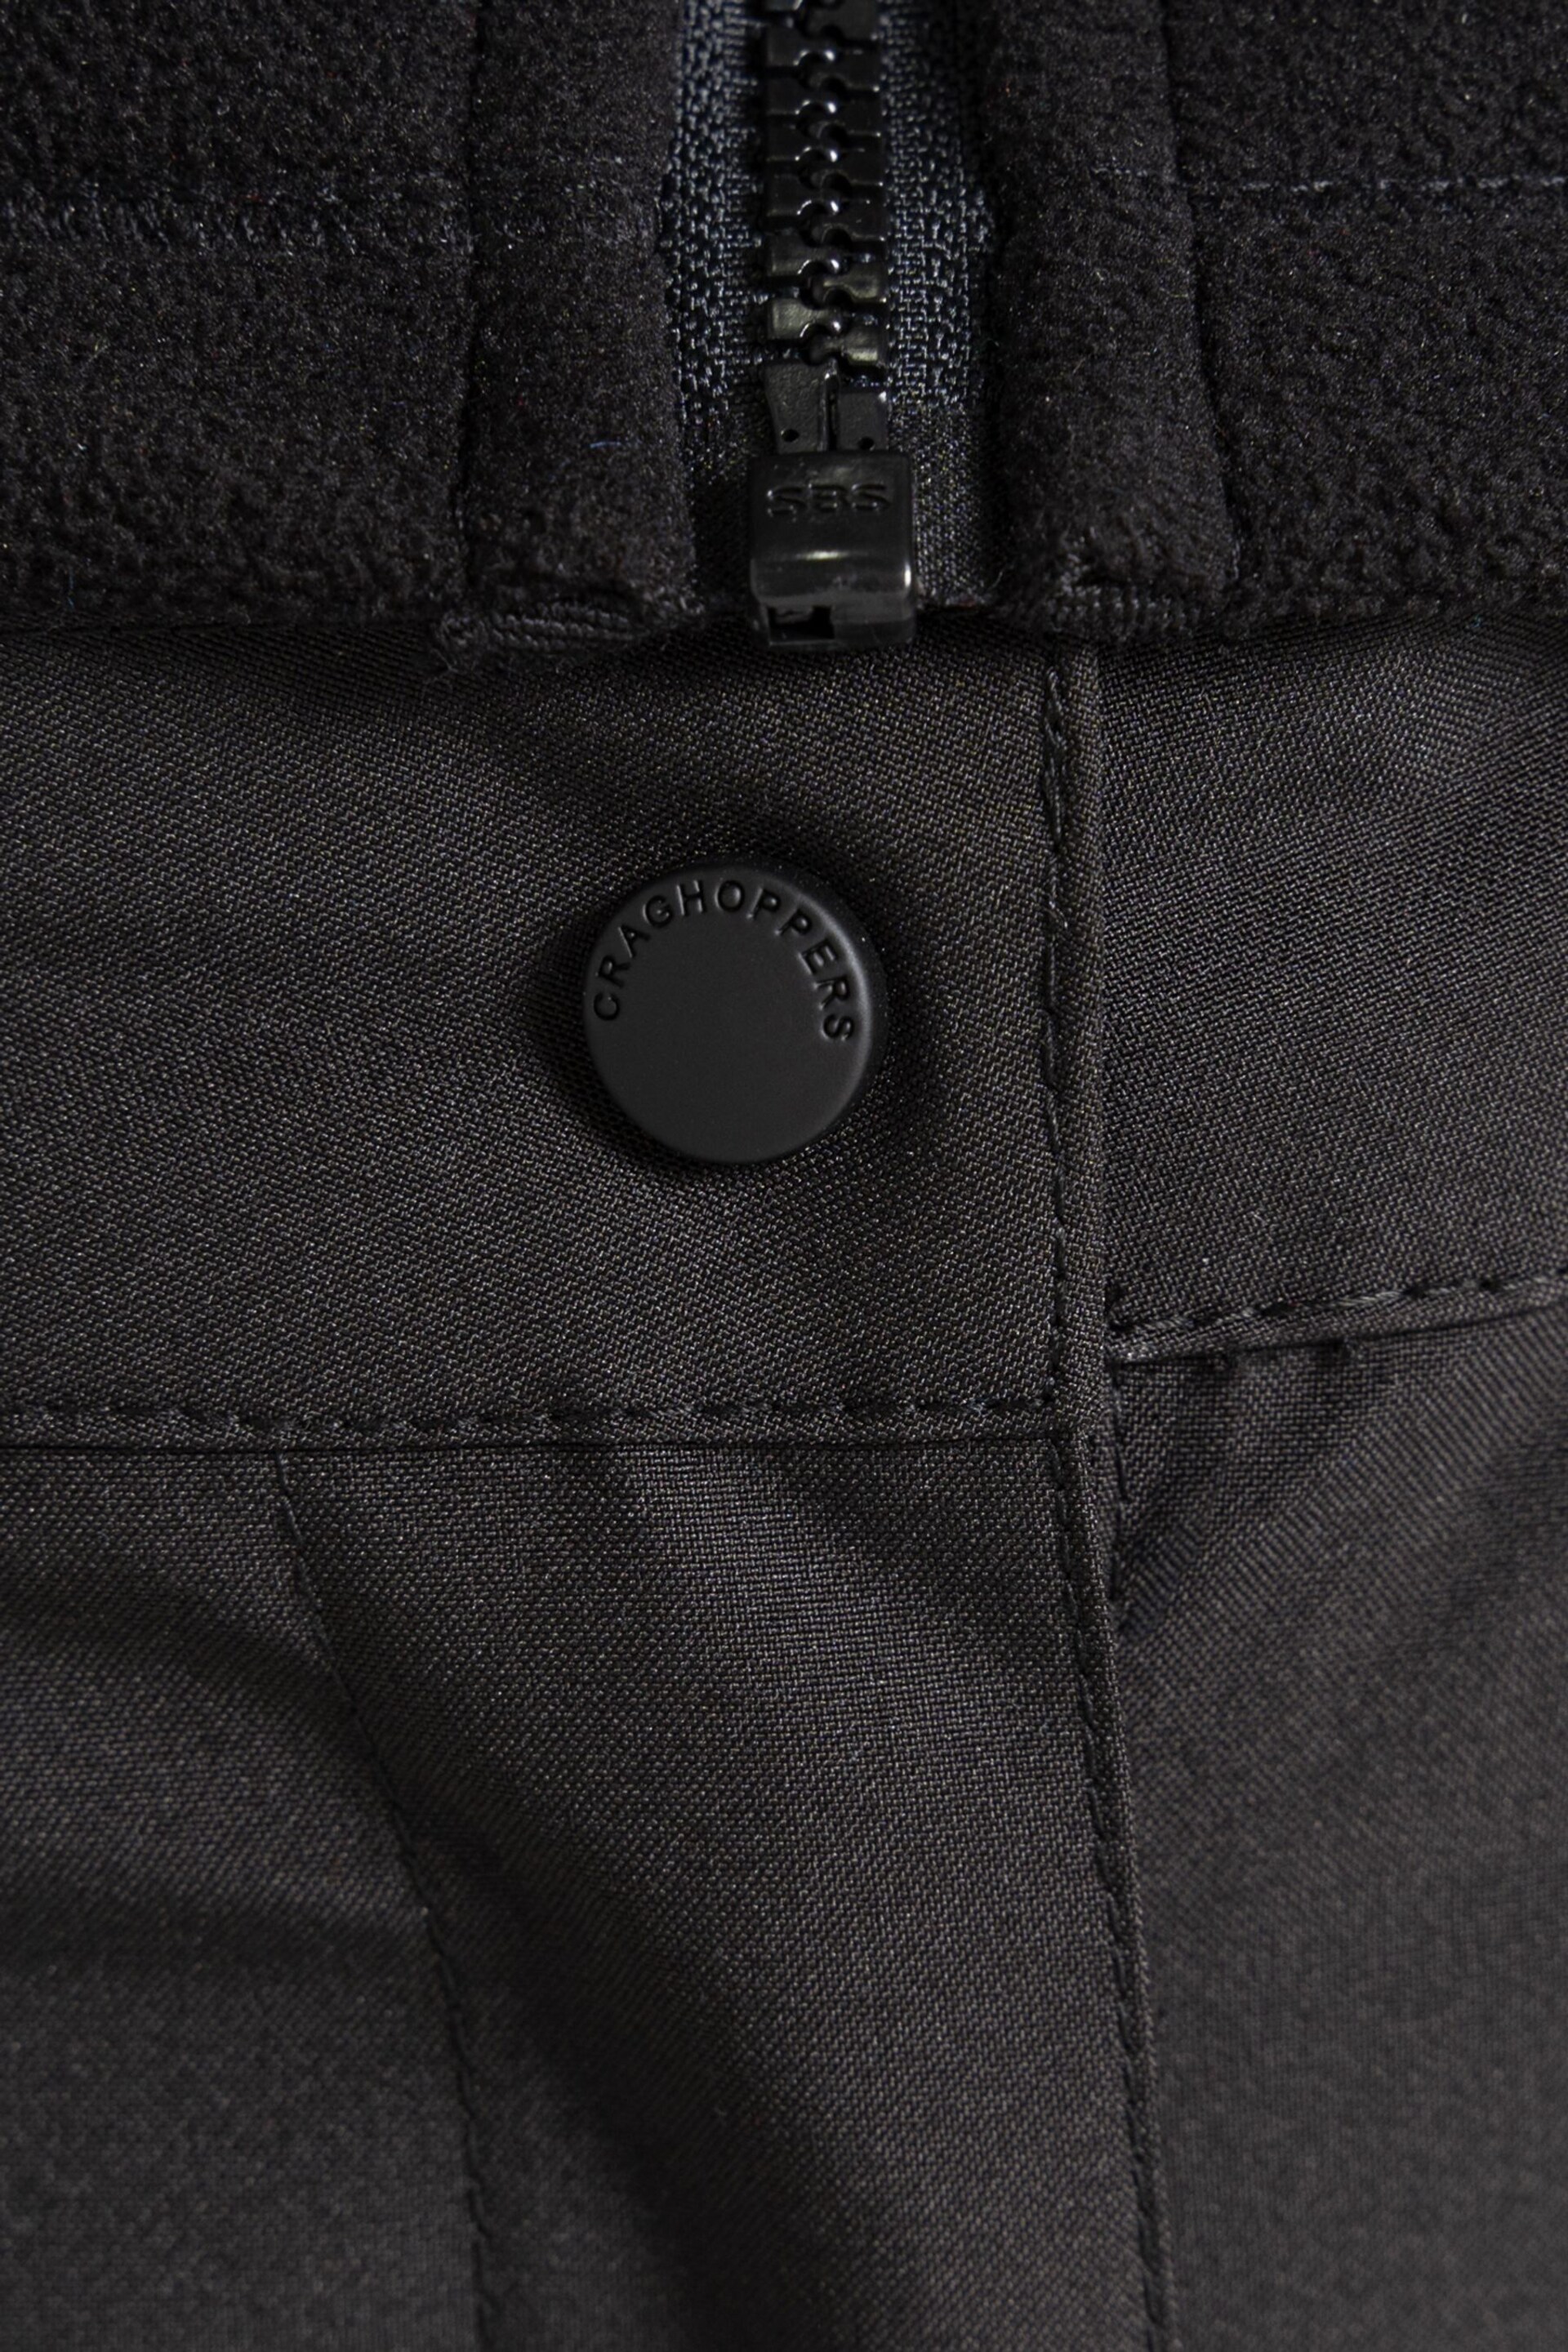 Craghoppers Aysgarth Black Thermo Trousers - Image 6 of 6